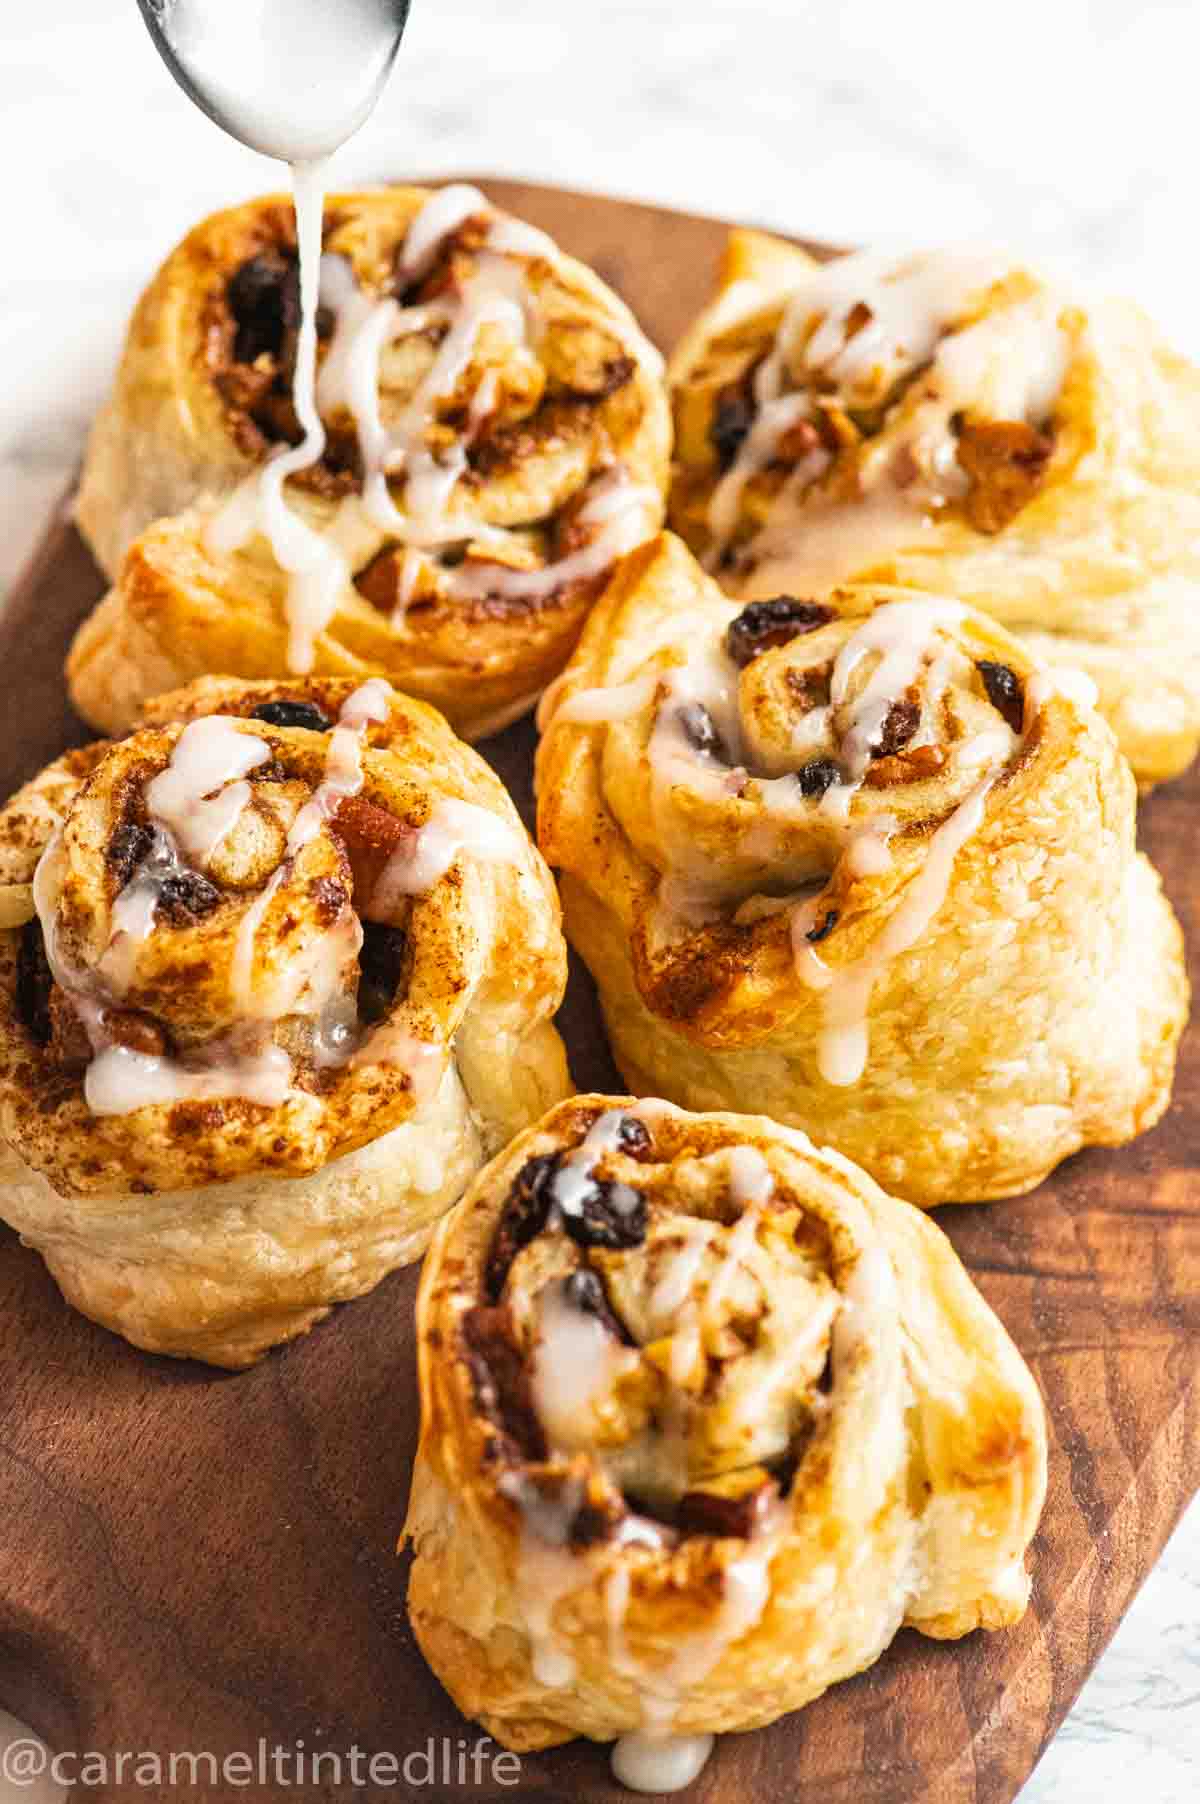 Icing being poured from a spoon on puff pastry rolls with cinnamon filling 